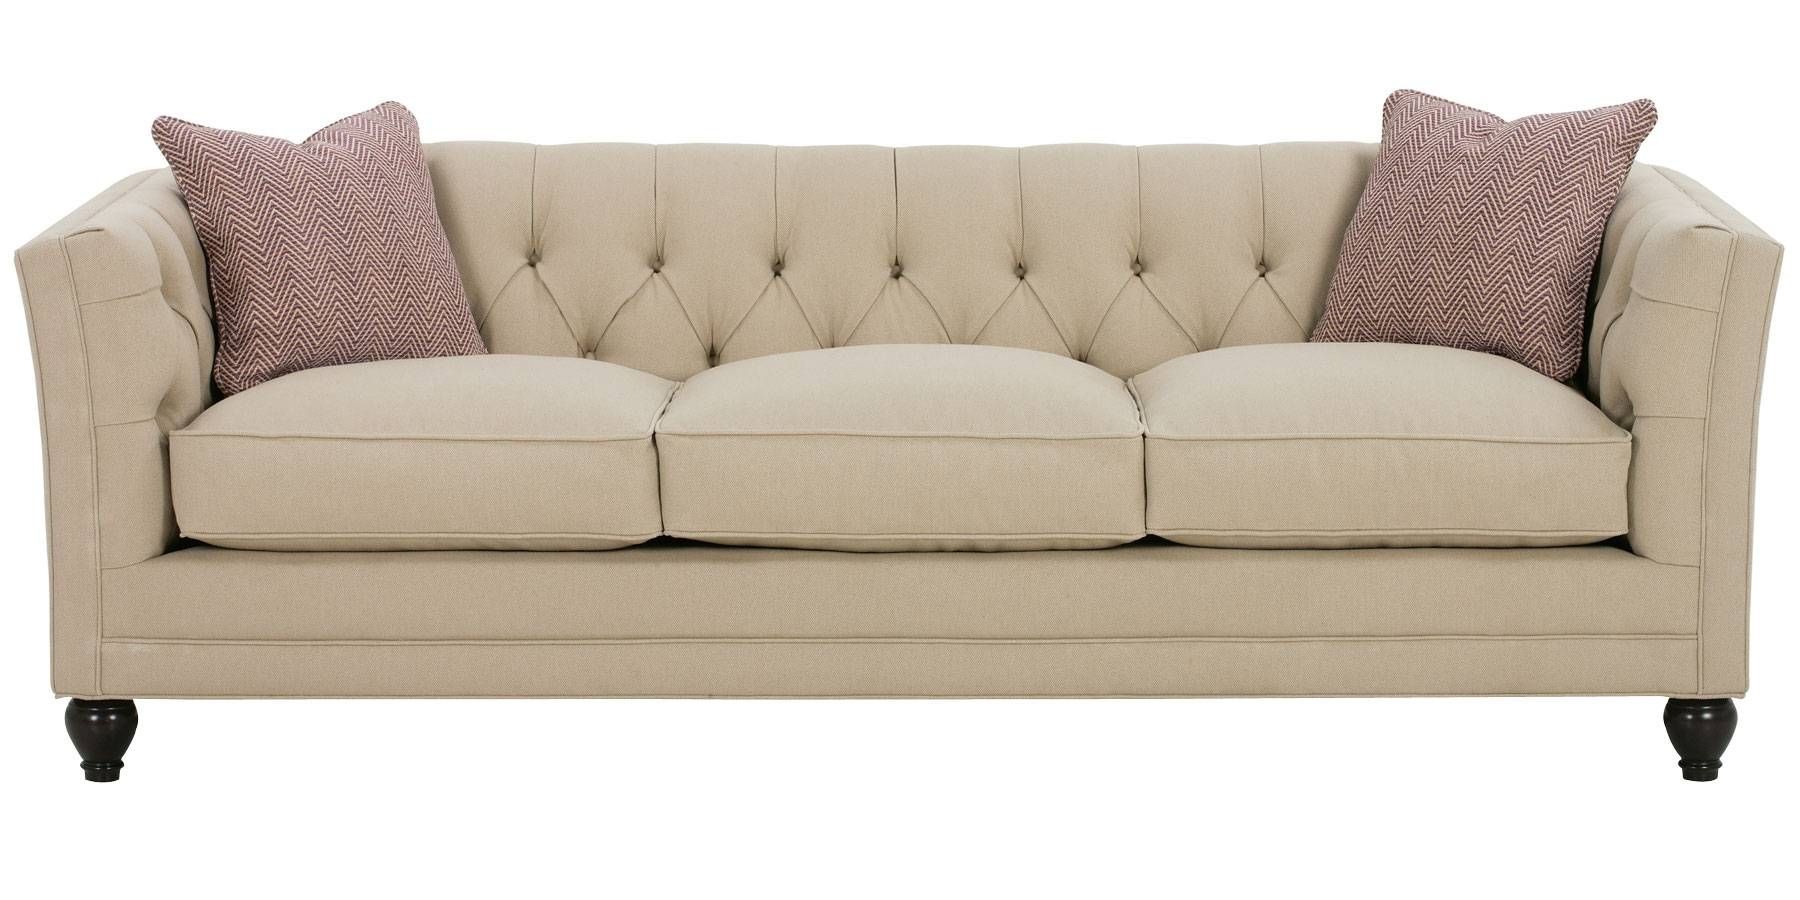 Sofas Center : Black Fabric Sofas For Sale Cream Chesterfield Within Traditional Sofas For Sale (View 29 of 30)